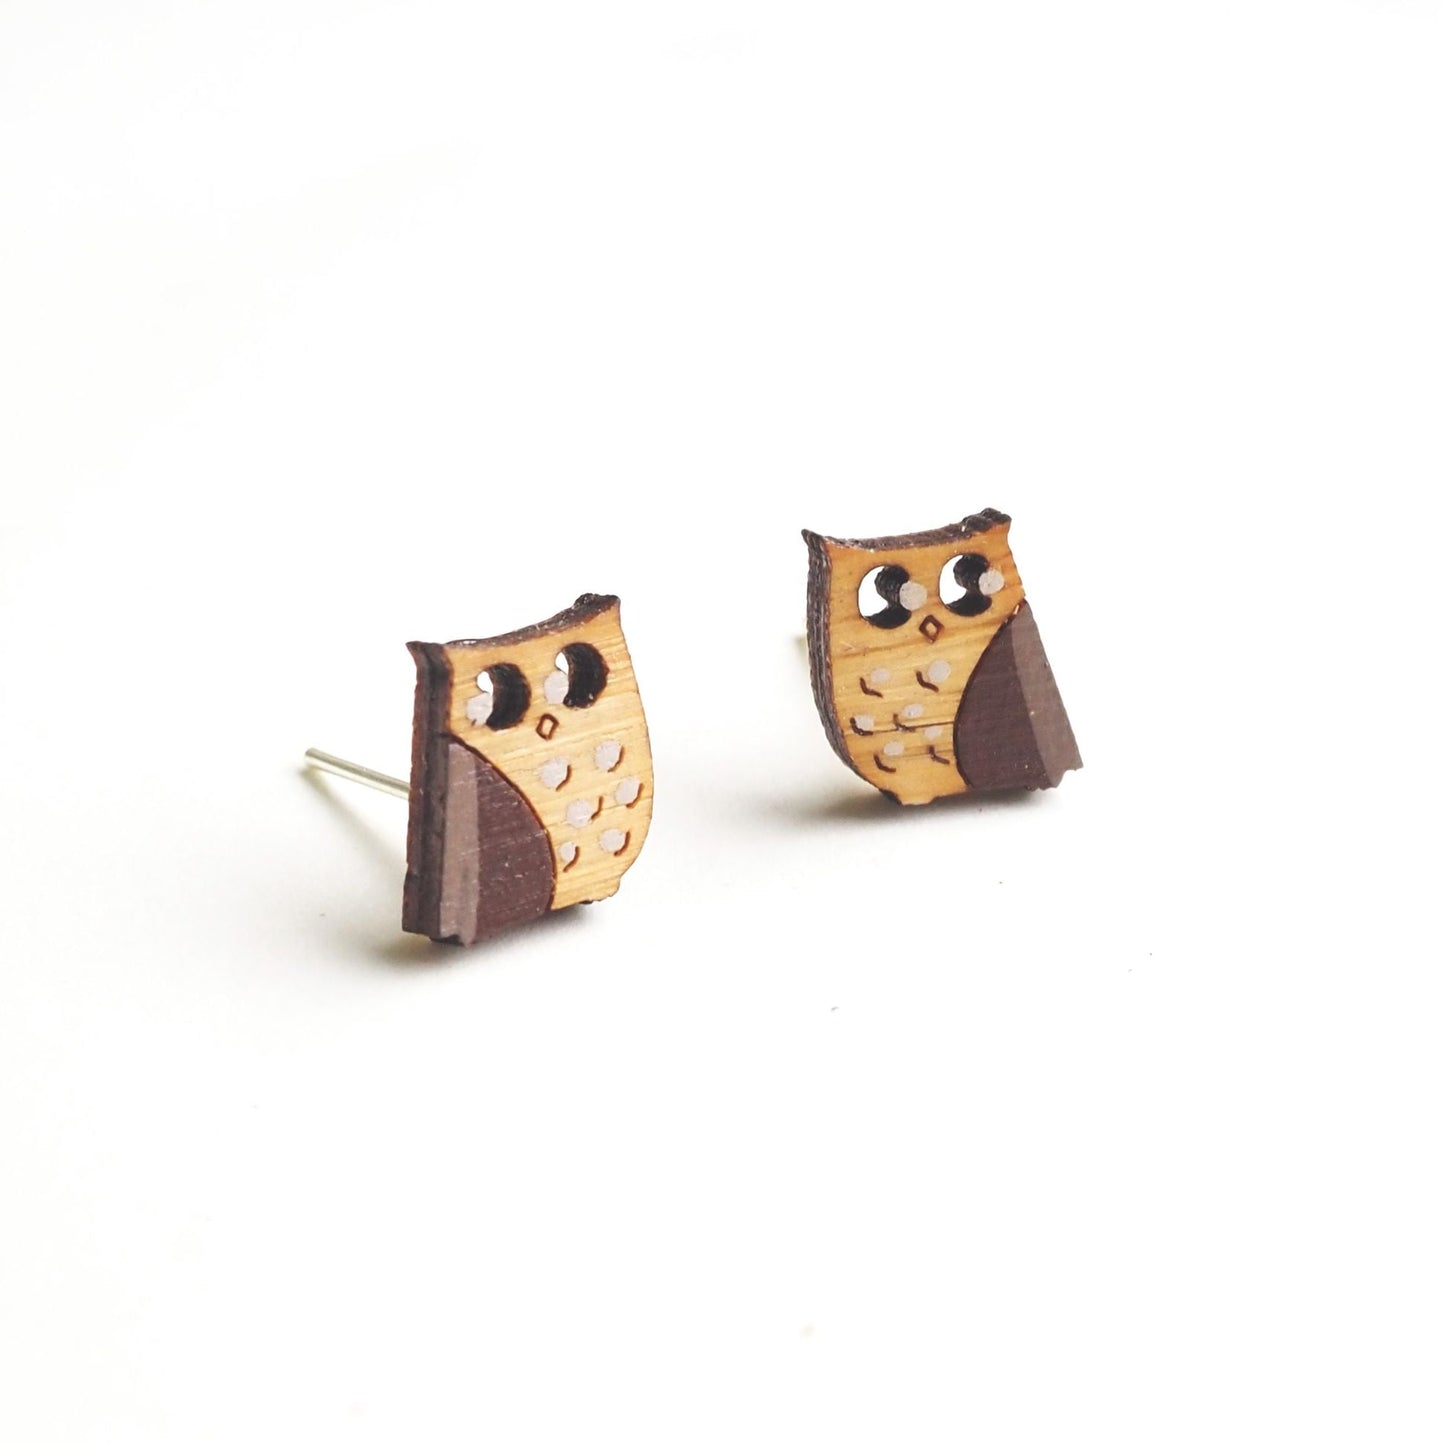 The owl earrings side by side against a white background.